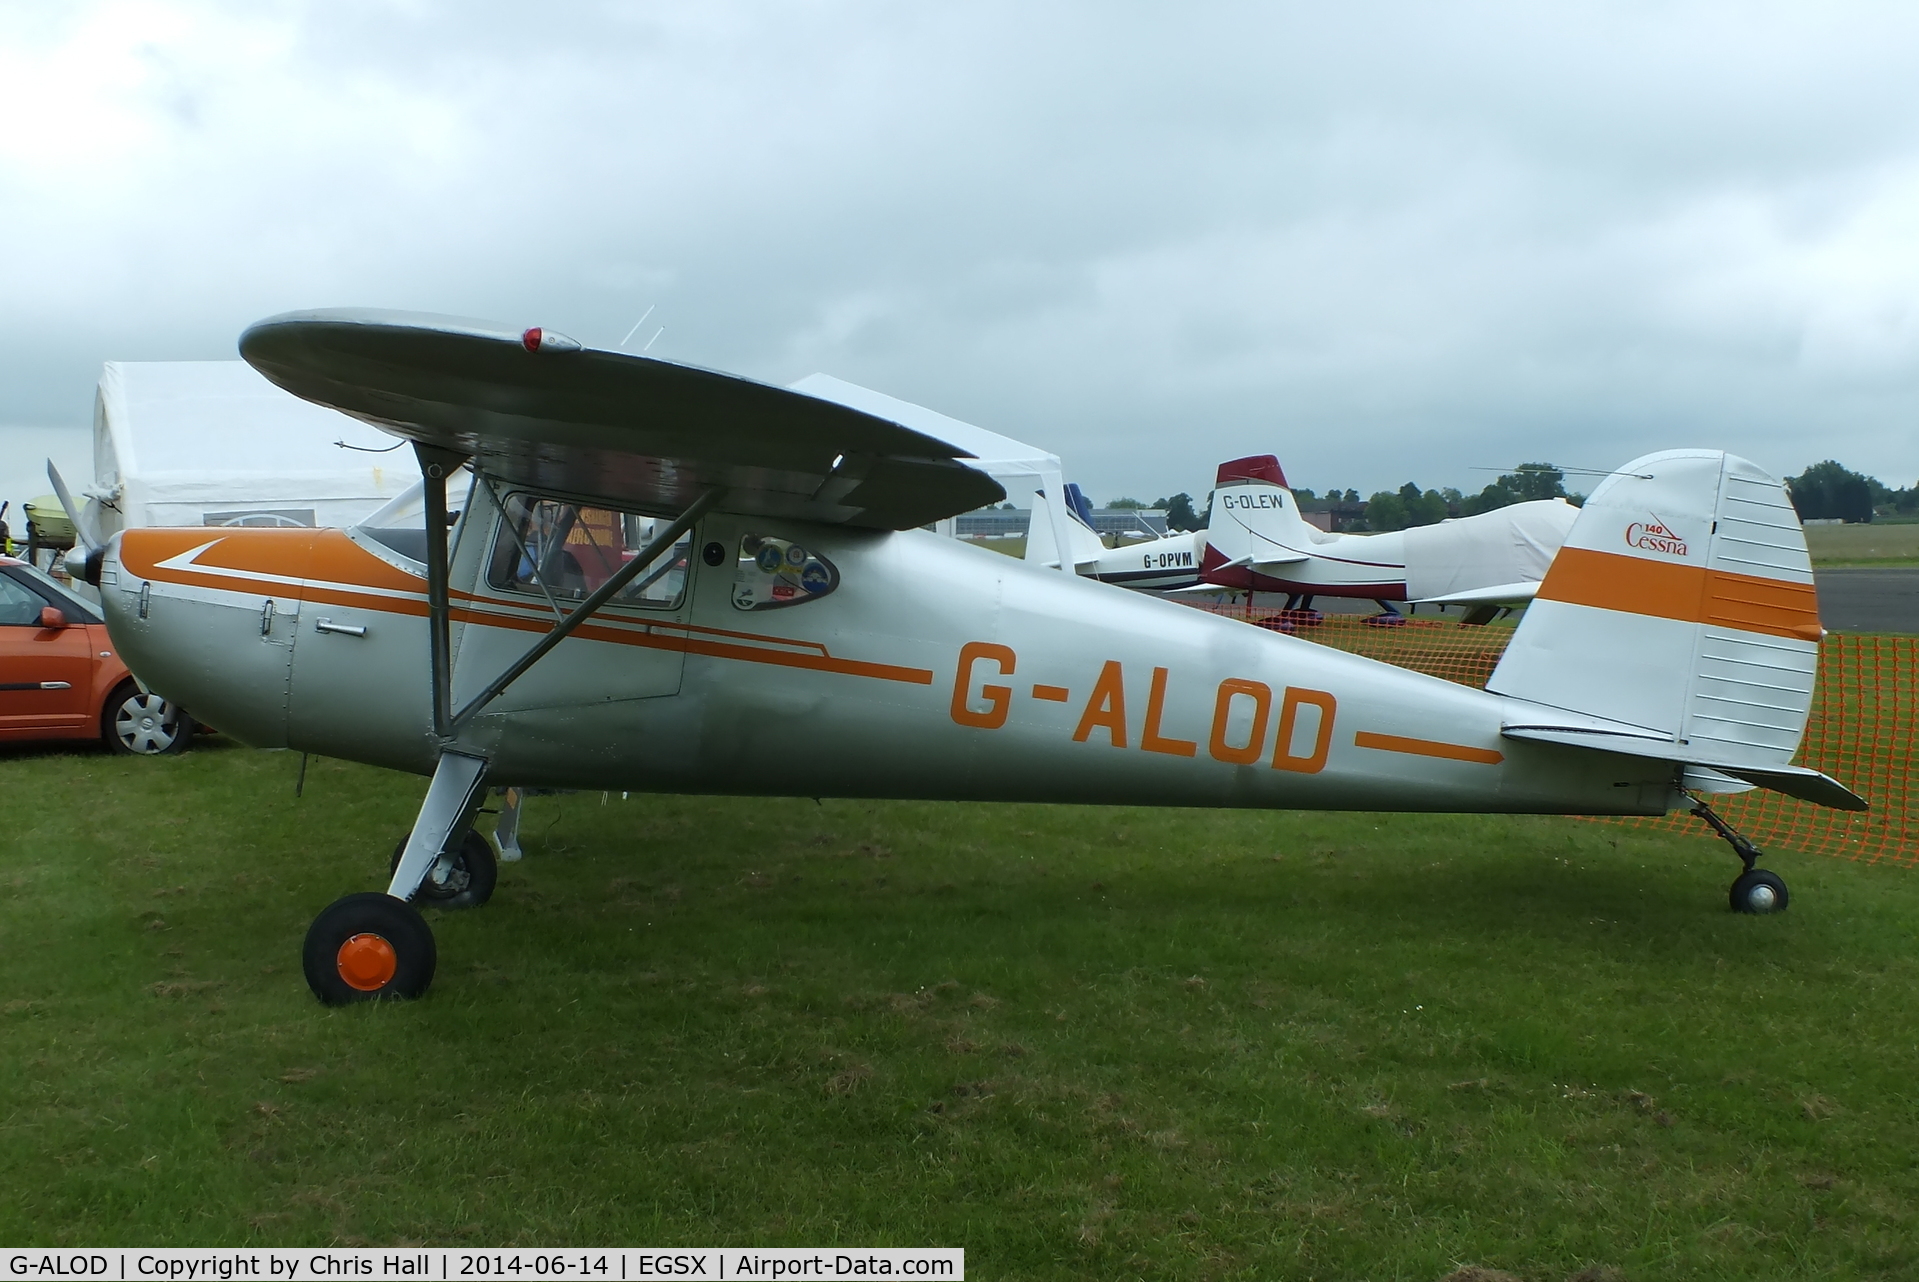 G-ALOD, 1947 Cessna 140 C/N 14691, at the Air Britain fly in